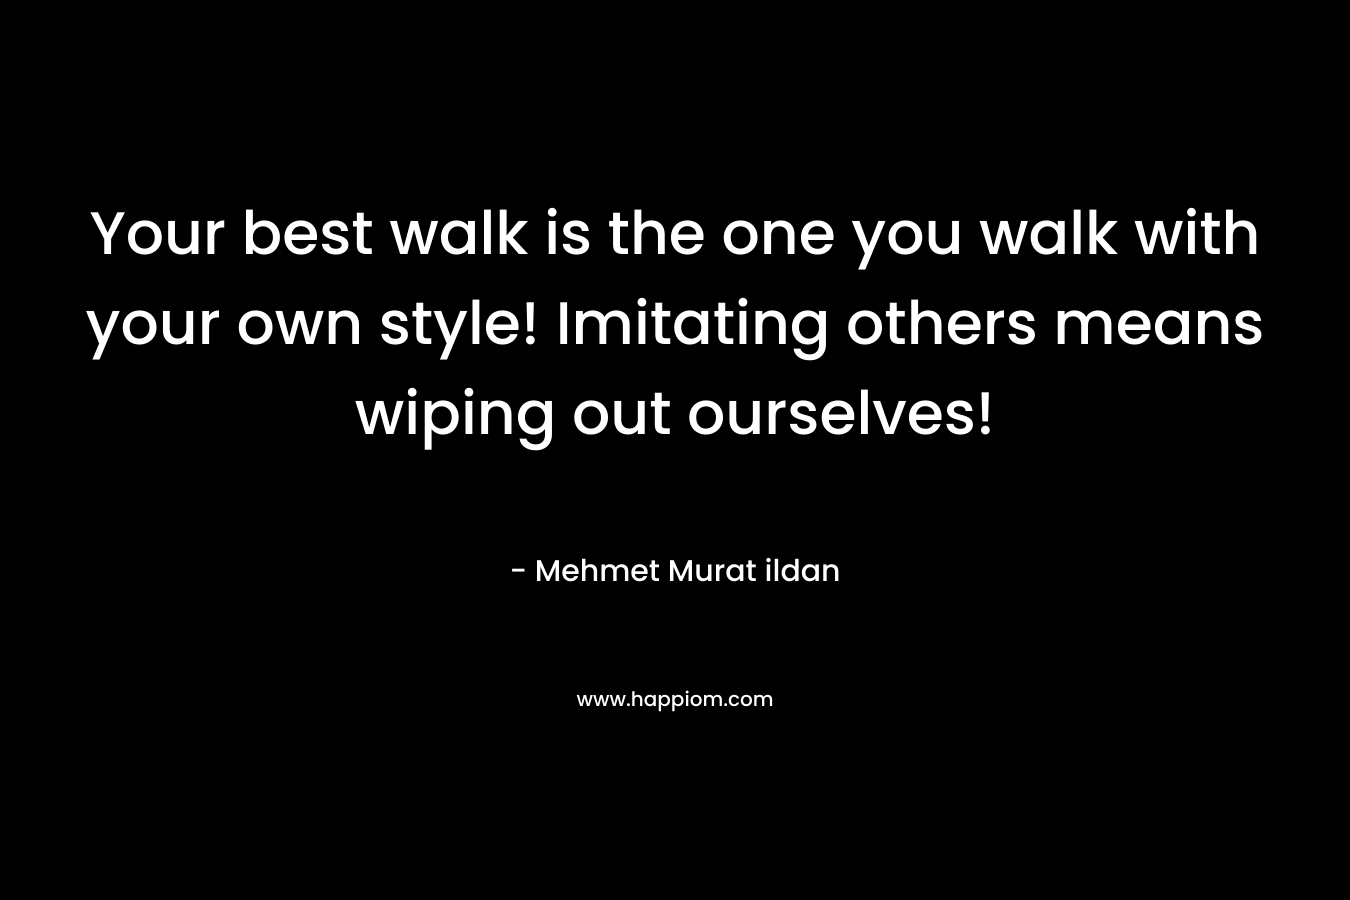 Your best walk is the one you walk with your own style! Imitating others means wiping out ourselves!